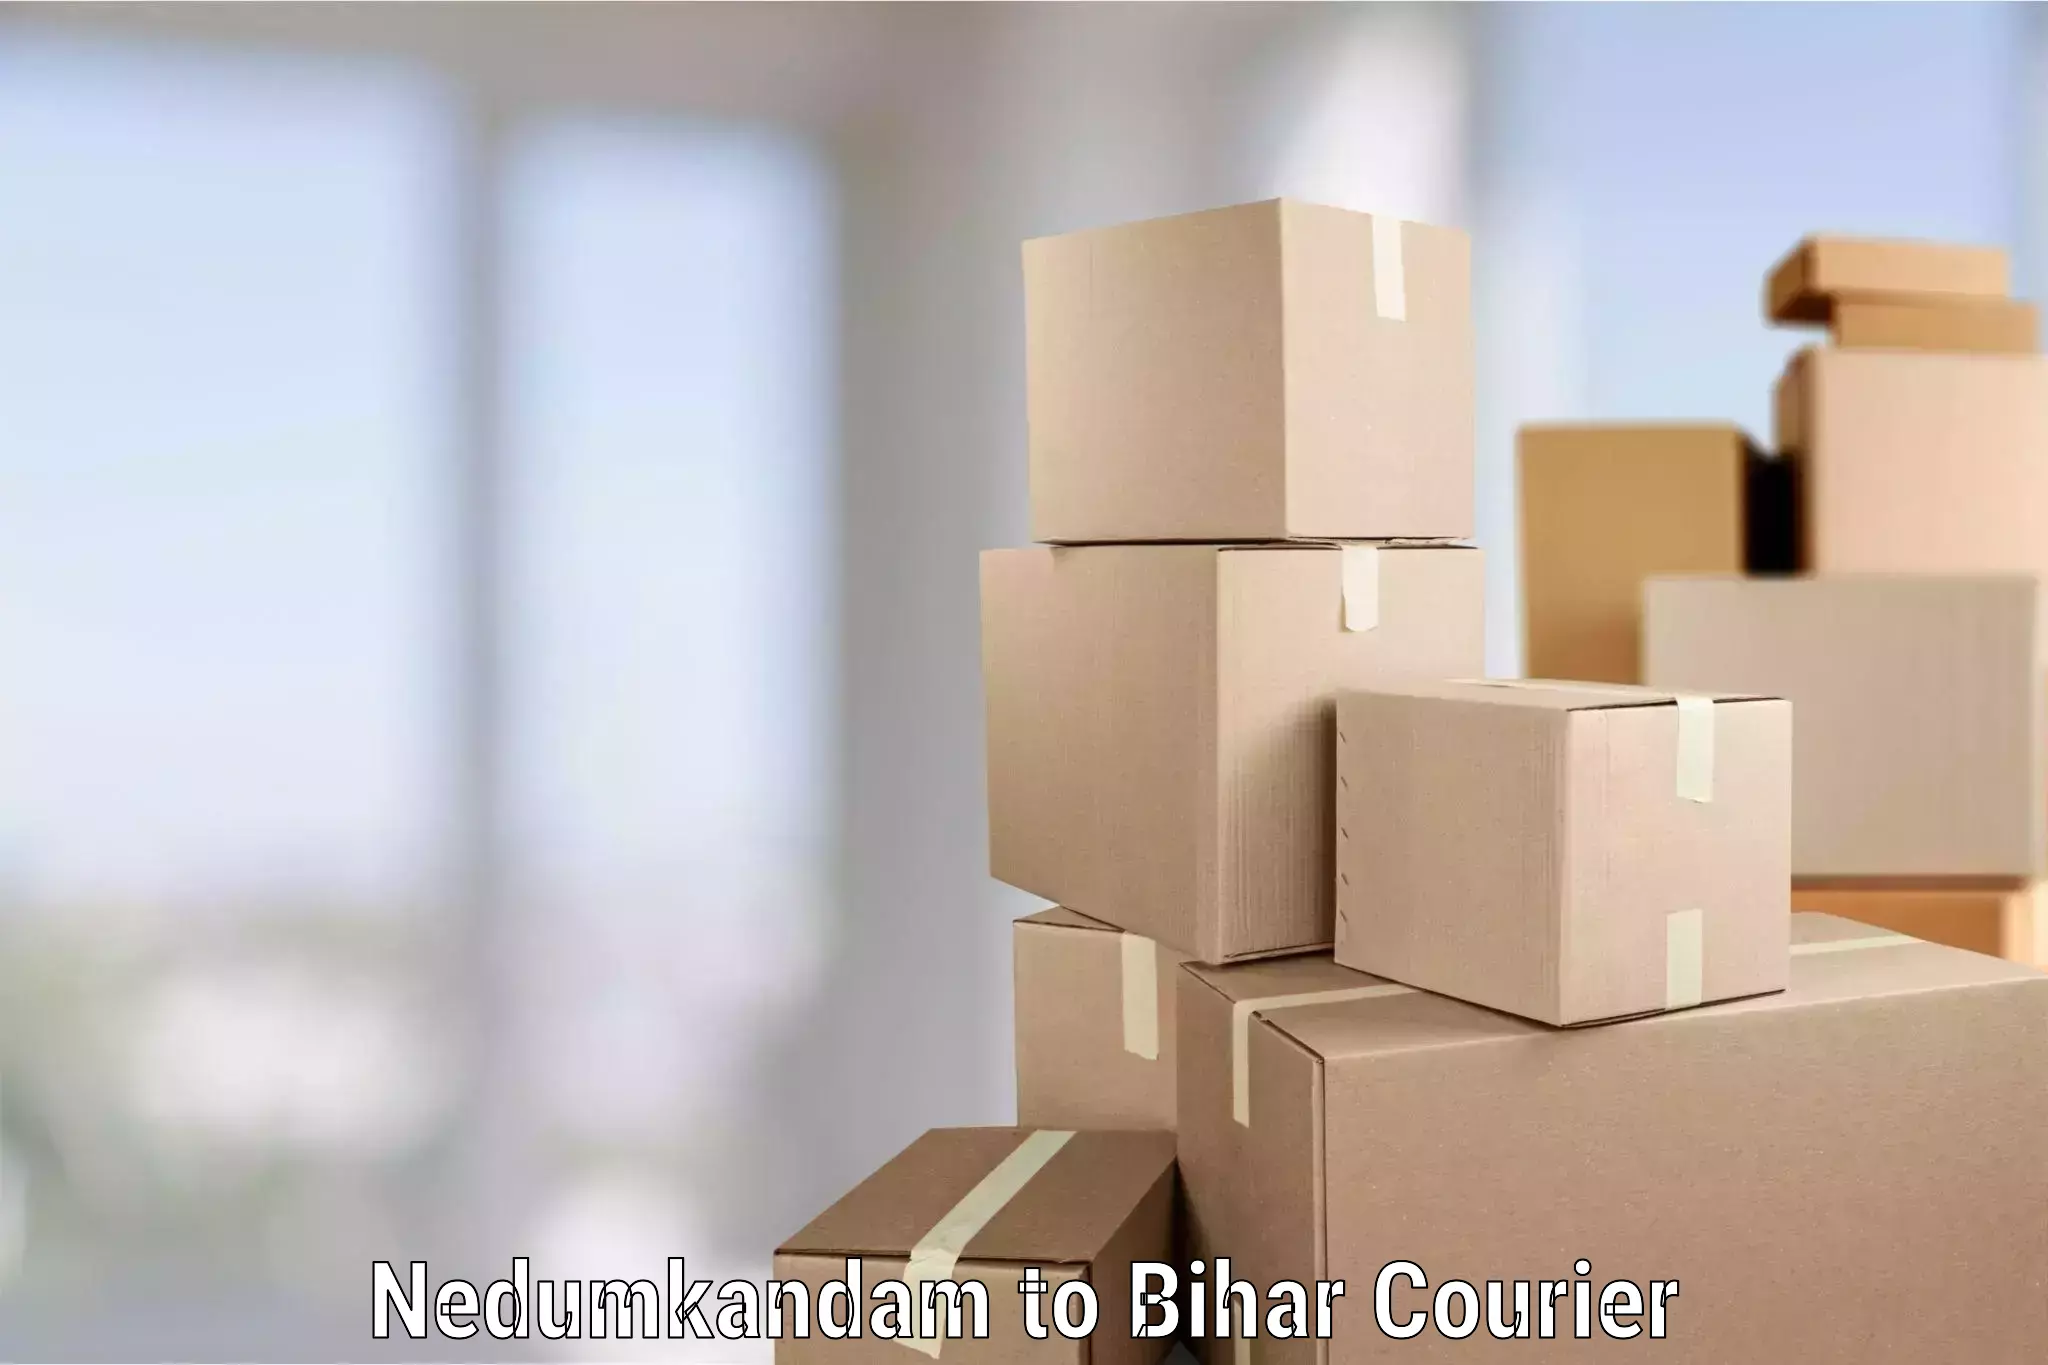 Efficient moving and packing in Nedumkandam to Patna